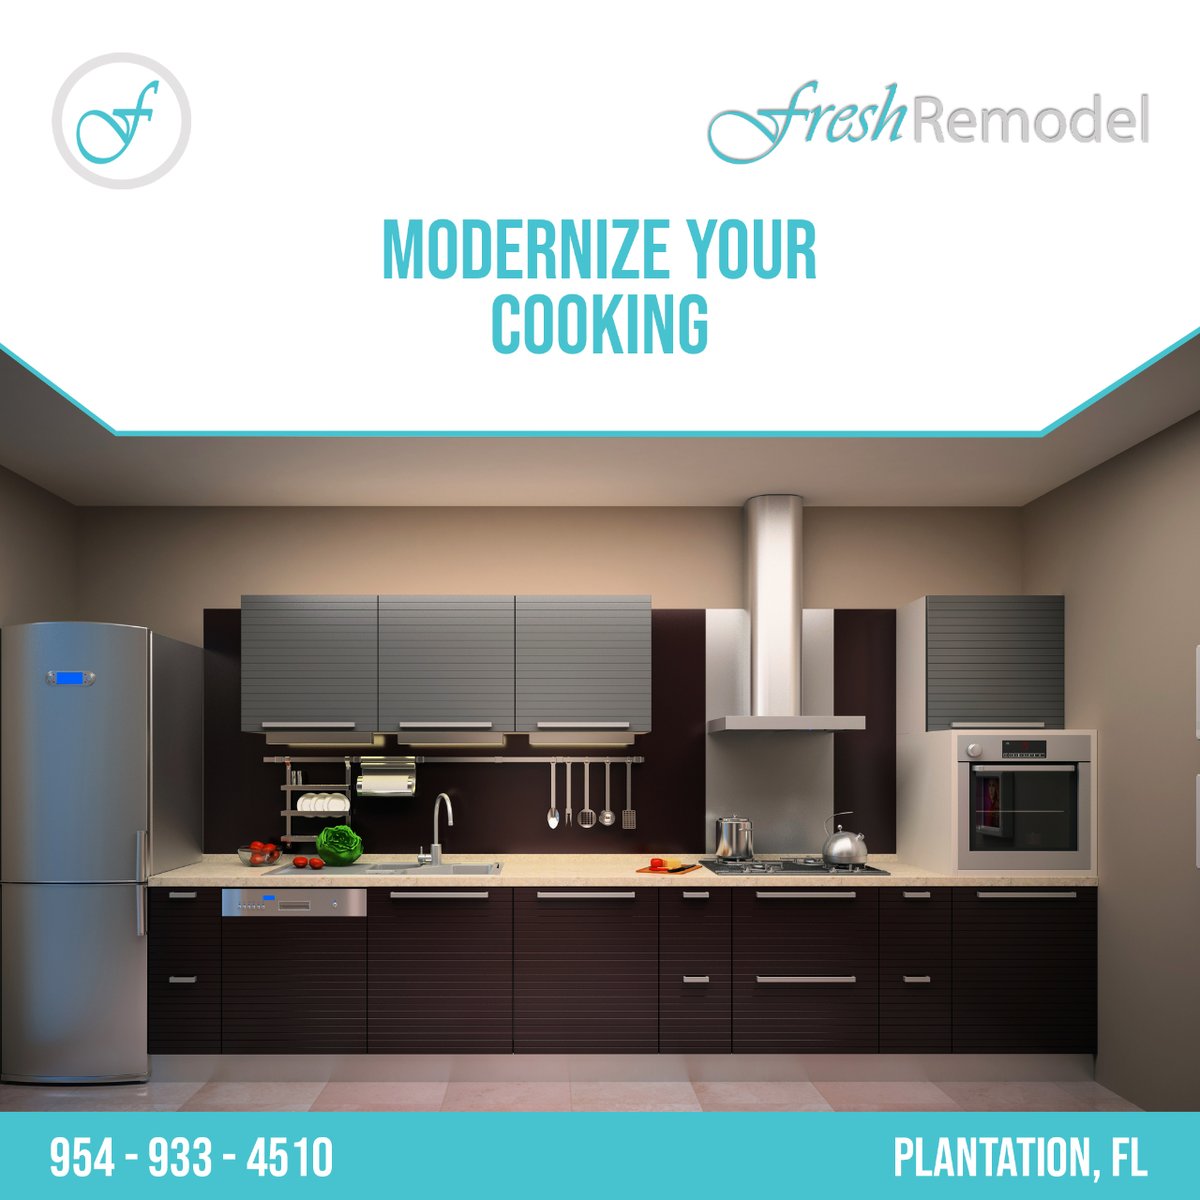 Transform your kitchen with precision and innovation! We offer expert craftsmanship and tailored solutions, from rustic warmth to sleek modernism. Visit freshremodel.com or call 954-933-4510 for consultation! #KitchenRemodel #ModernKitchen